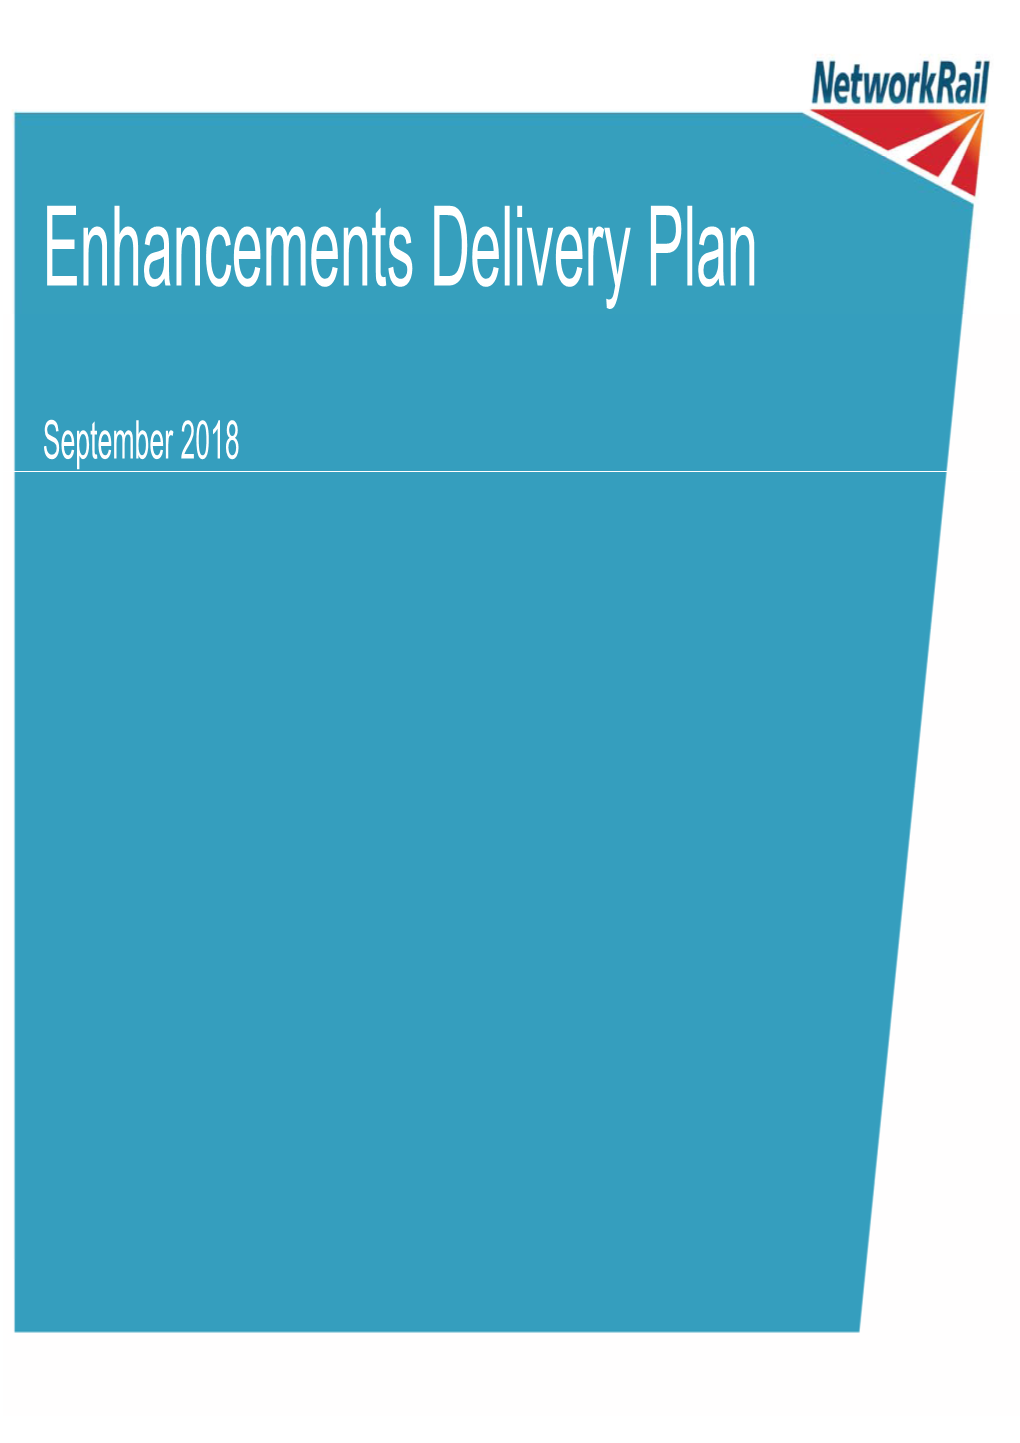 Enhancement Delivery Plan Update